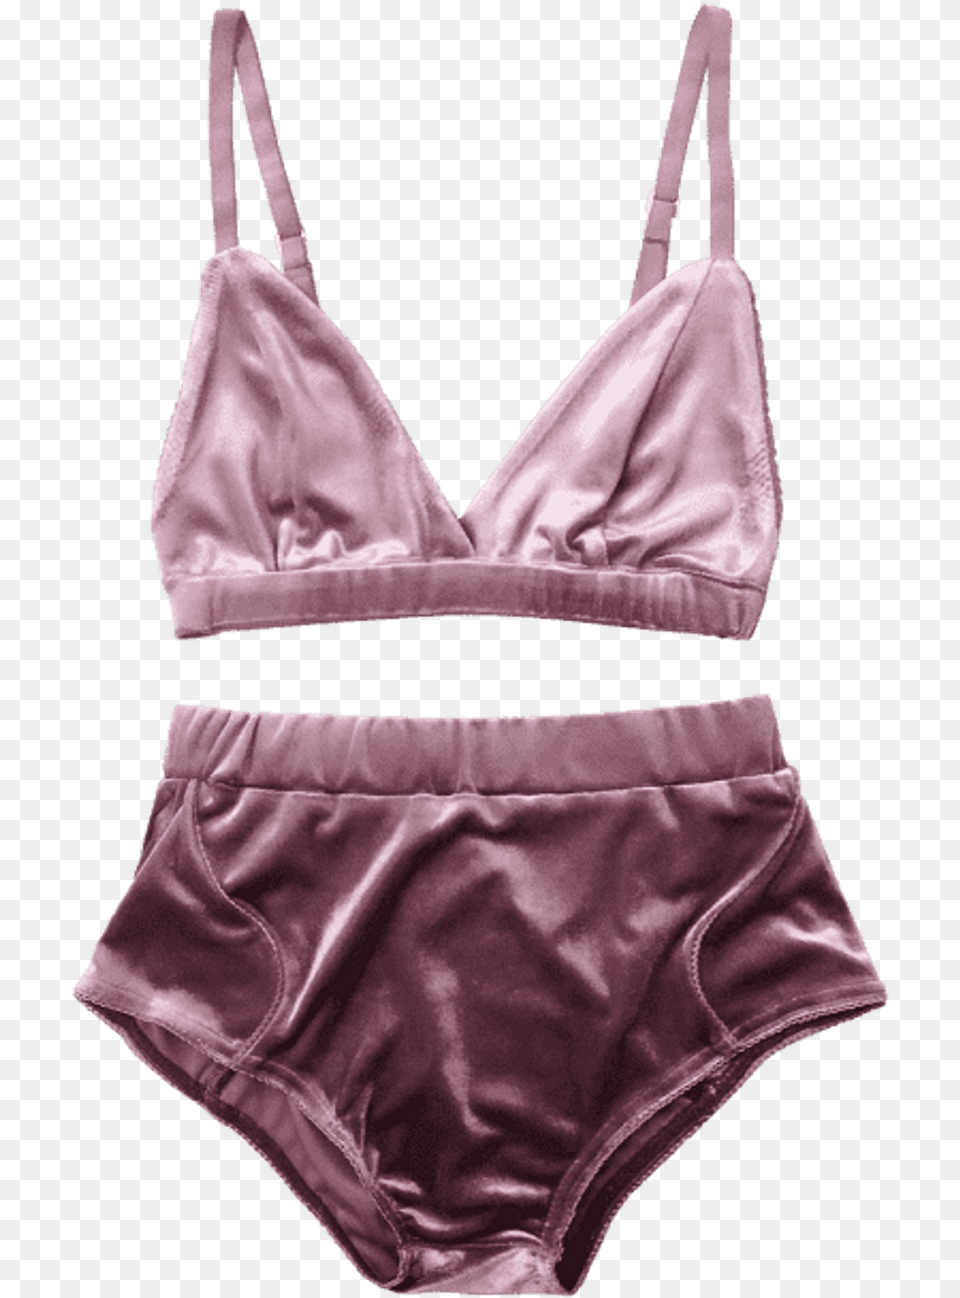 Report Abuse Velvet Underwear And Bra Set, Clothing, Lingerie, Accessories, Bag Png Image